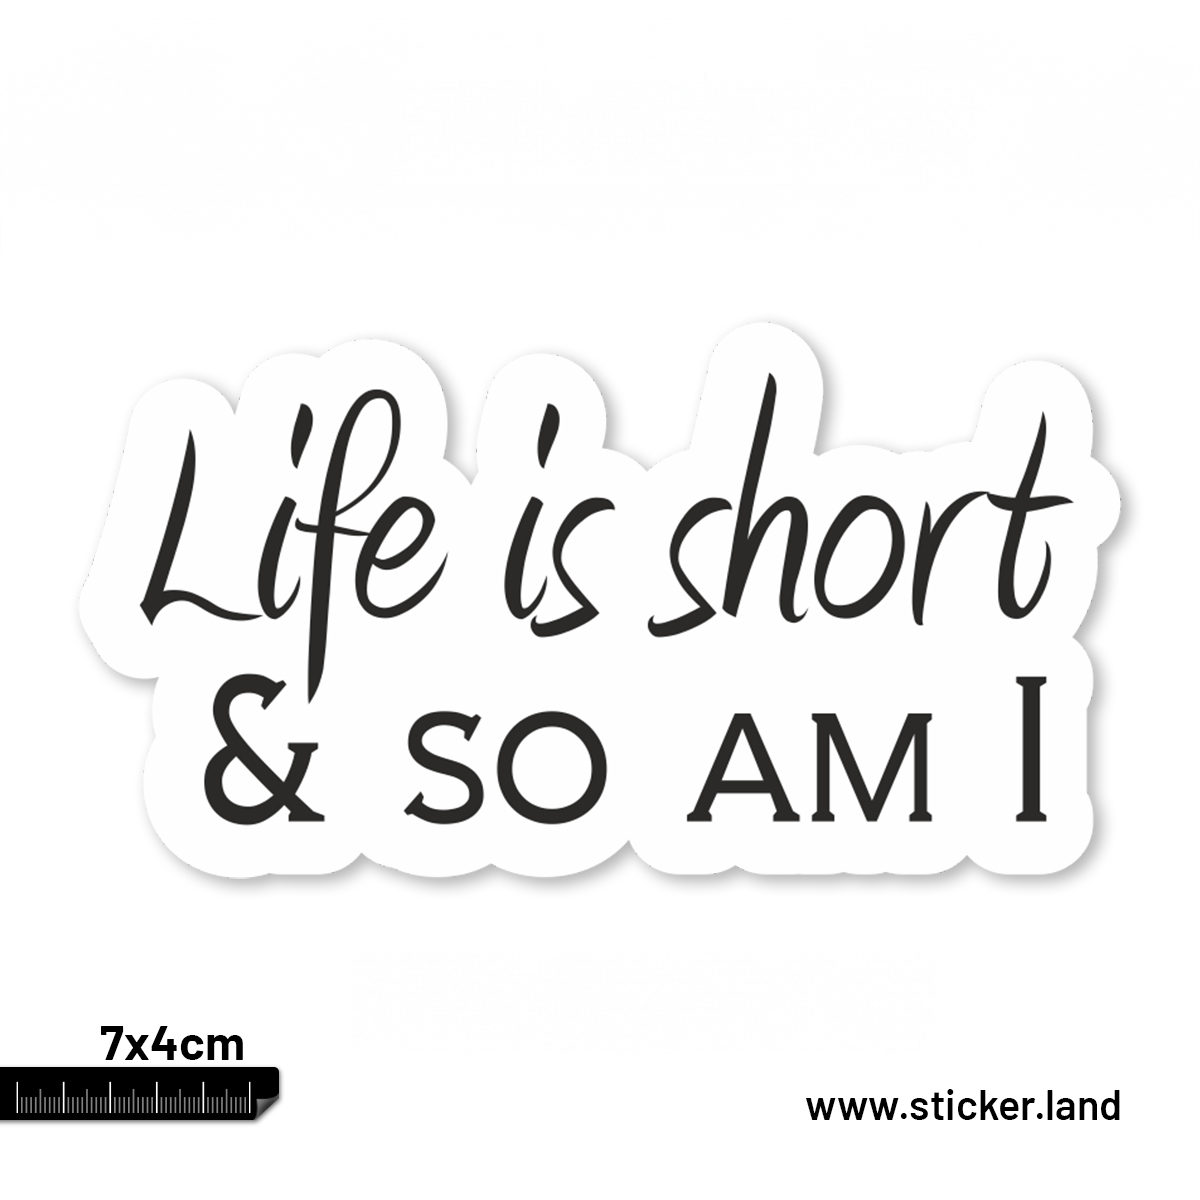 Life is short, but my stickers are even shorter! 😄✂️

Buy now: sticker.land/products/stick…

#ShortAndSweet #TinyButMighty #SmallJoys #FunSize #StickerLove #LifeIsShort #ExpressYourself